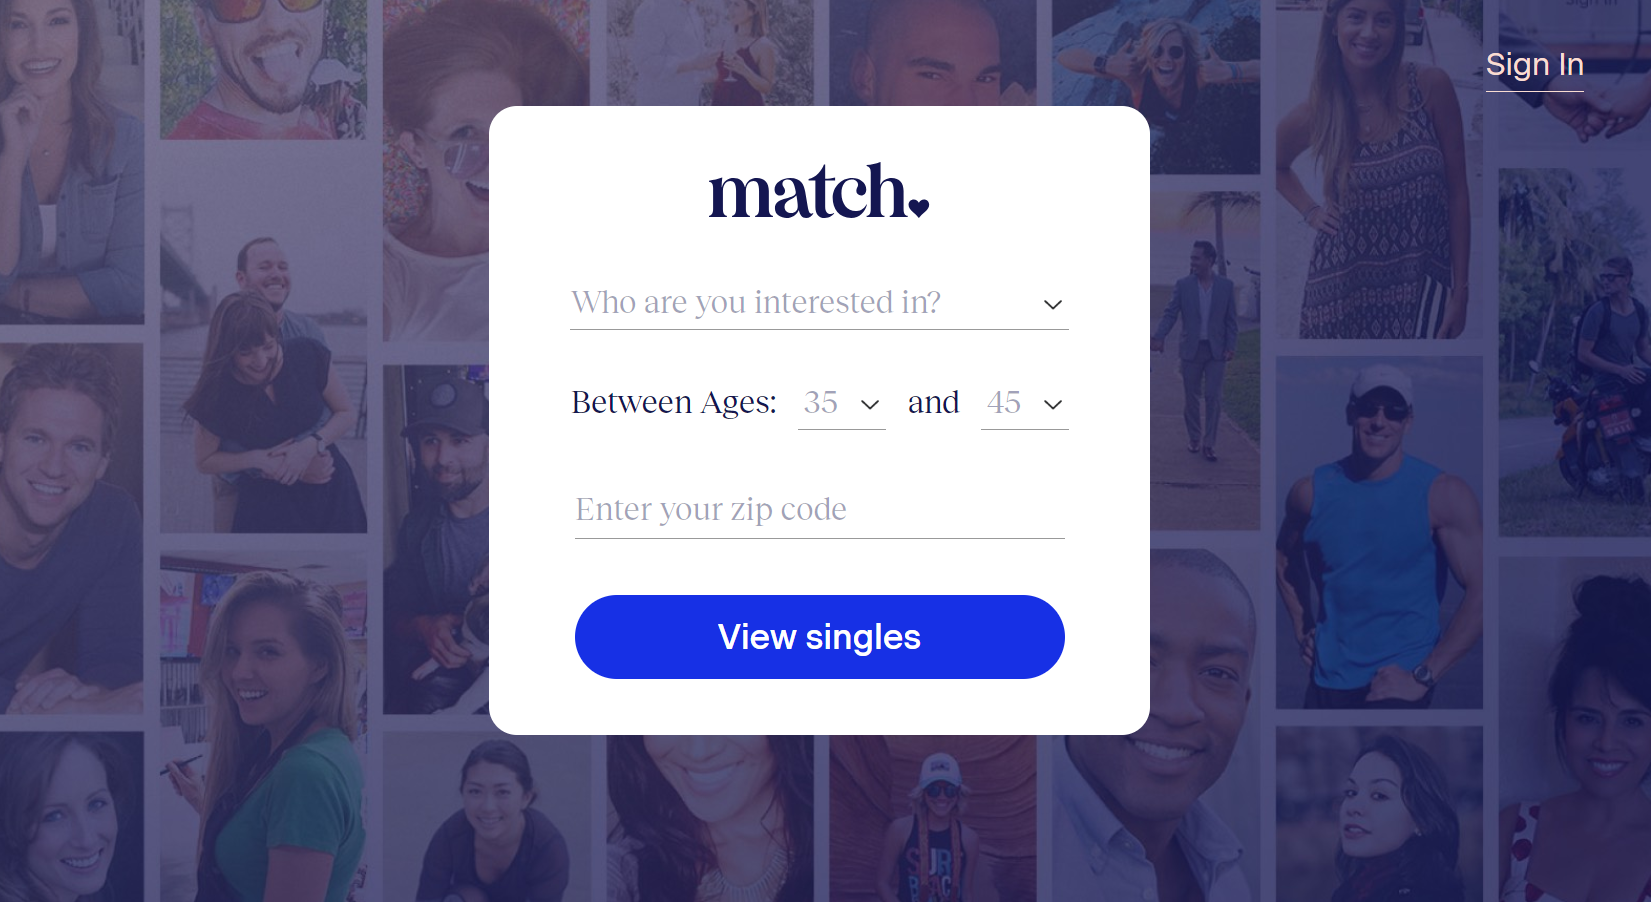 The homepage of chat app match.